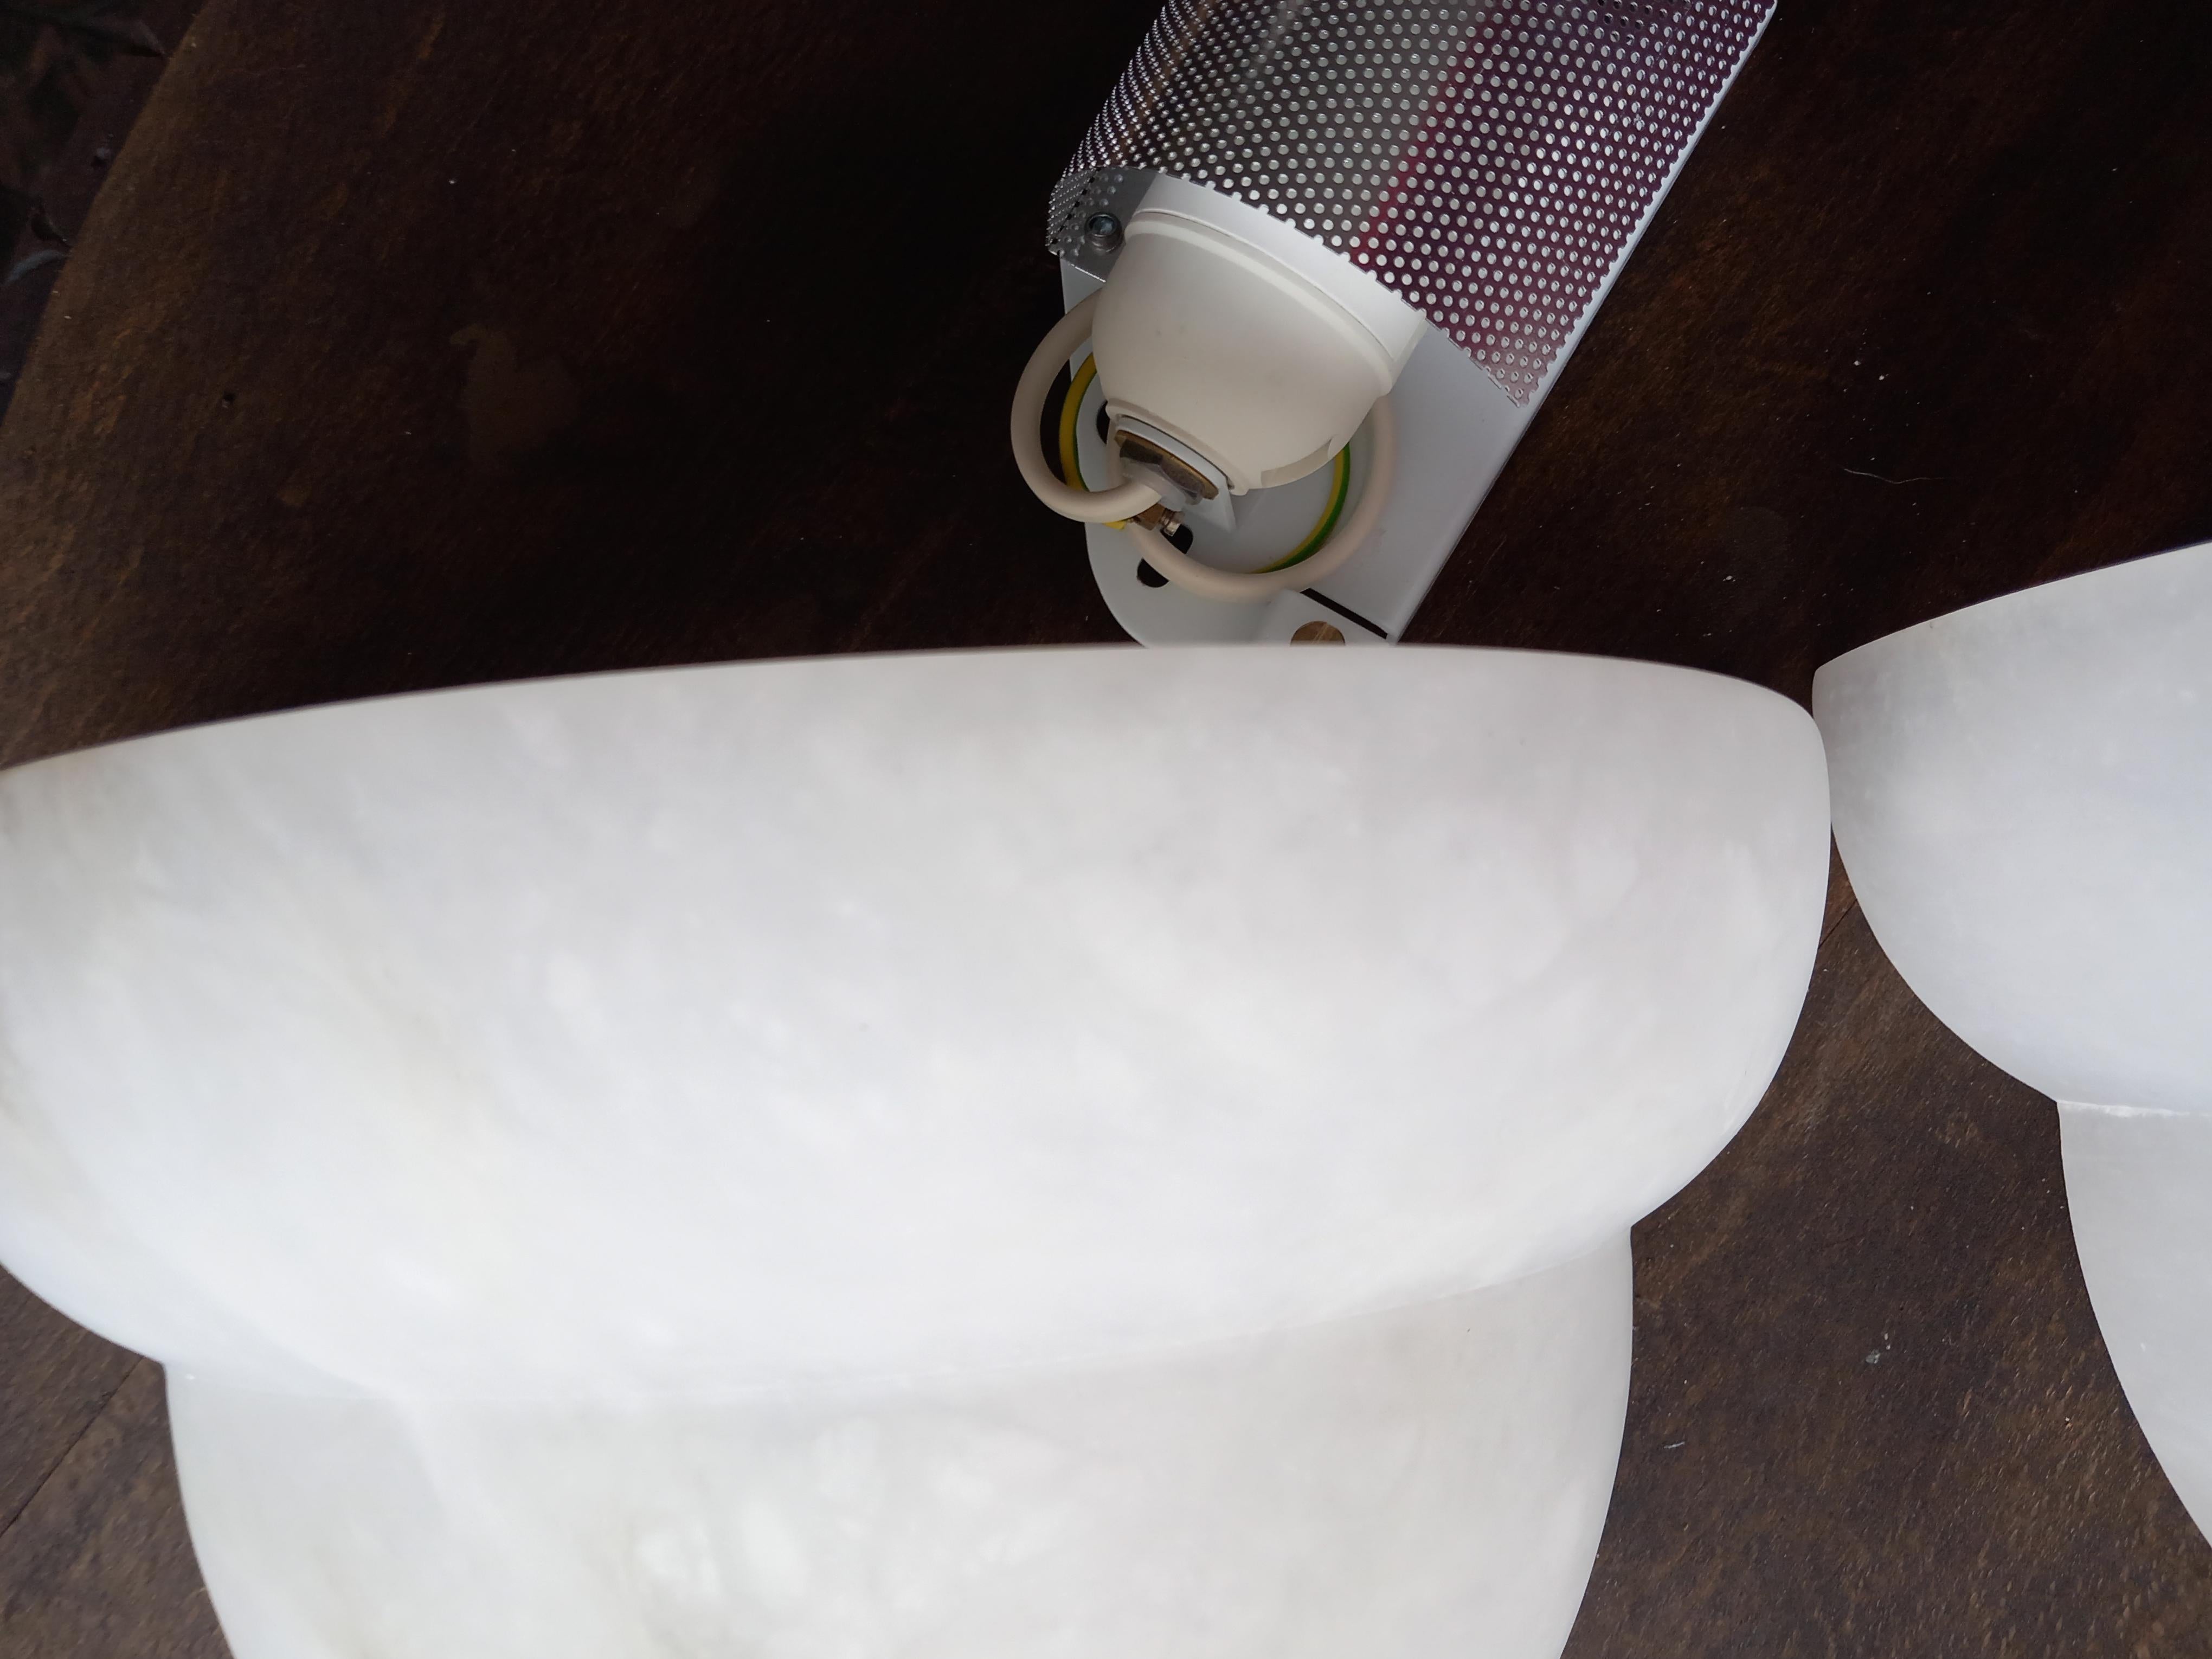 White natural alabaster sconces
It is a very special piece, the white is very pure 
It is in excellent condition, like new. It comes from a warehouse, never used.
New wiring. It is embedded in the piece that holds the wall light, that piece has